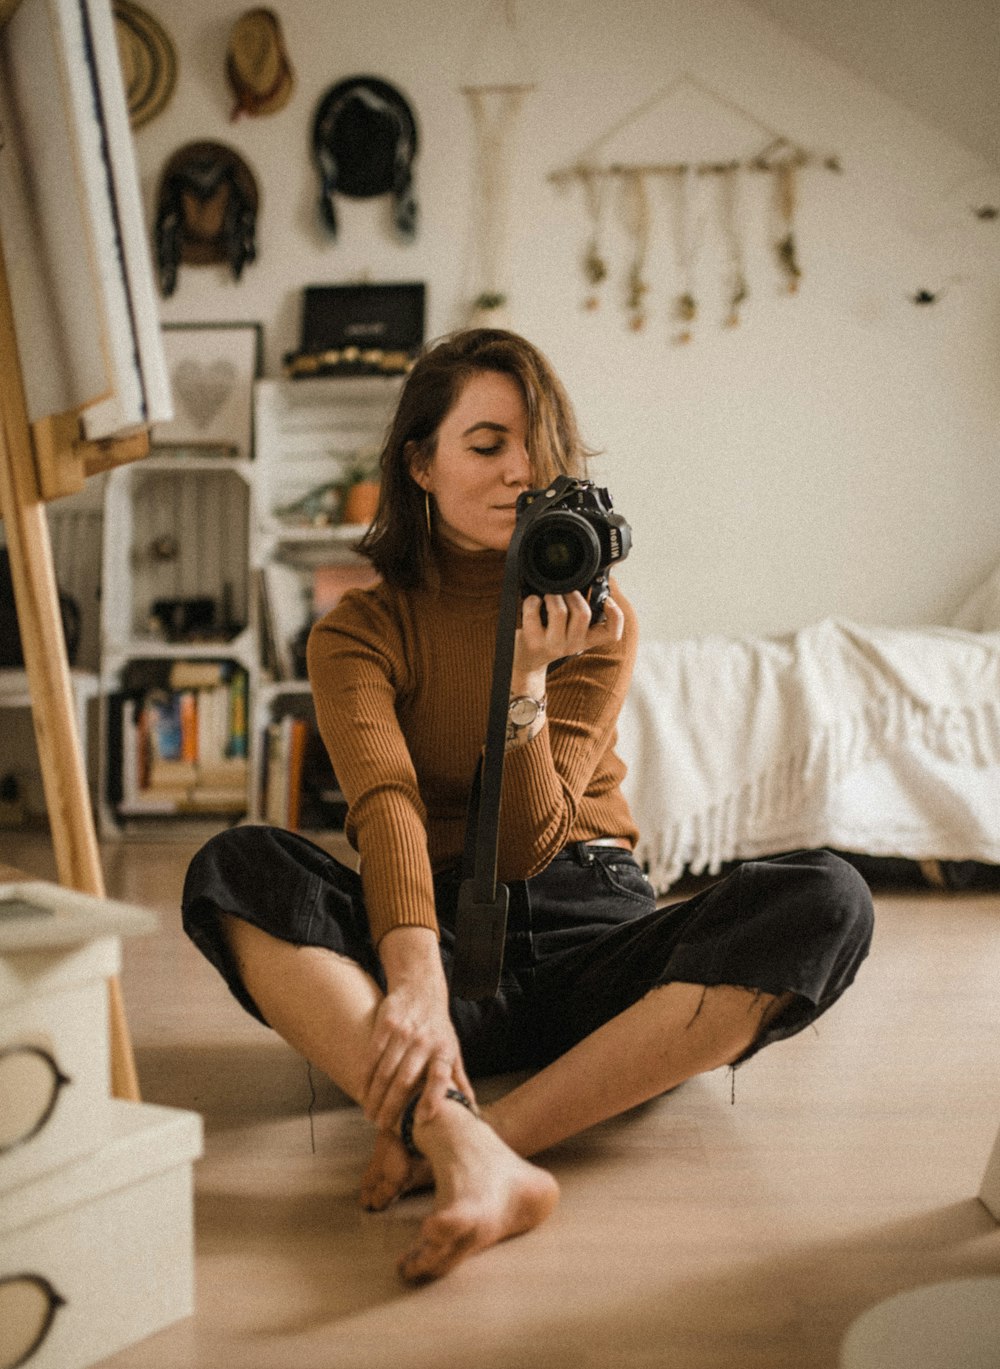 woman sitting on brown wooden floor while holding black DSLR camera in room